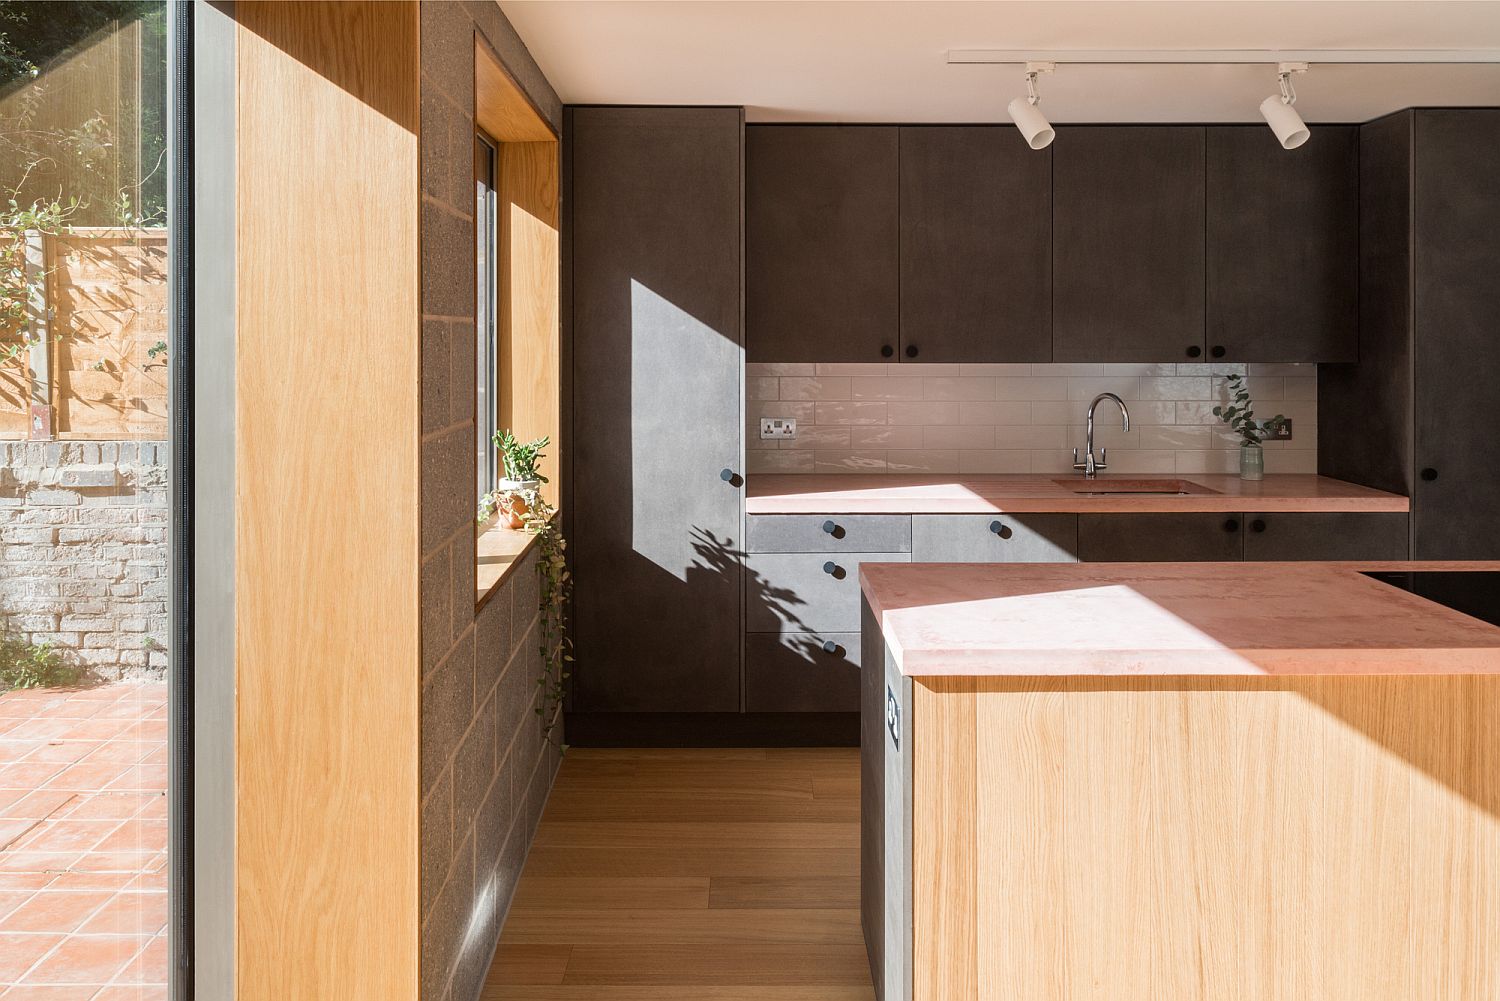 New kitchen of the revamped London home